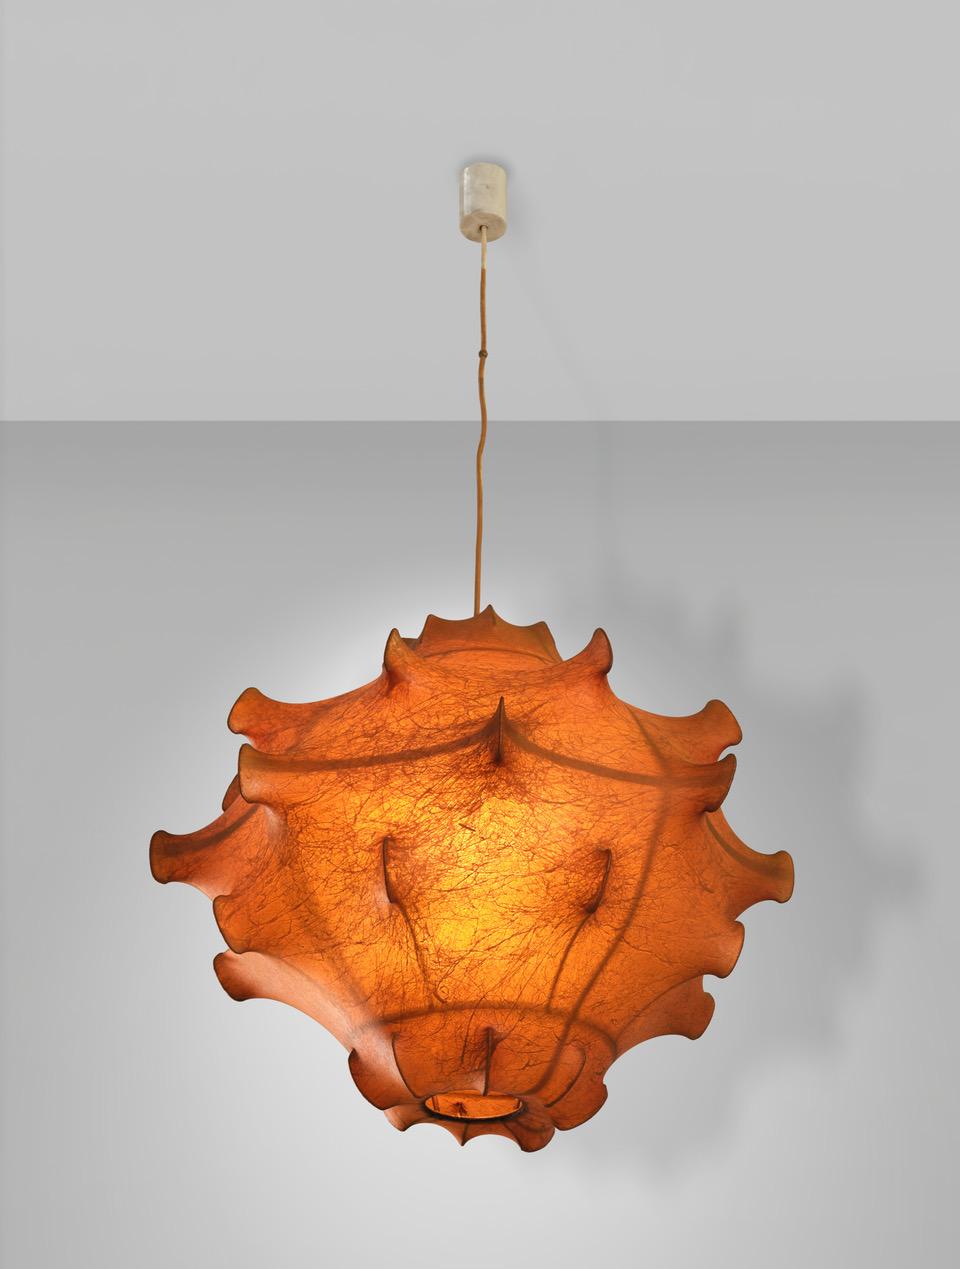 Achille and Piergiacomo Castiglioni Chandelier mod. Taraxacum Metal structure and Cocoon resin diffuser. Prod. Flos, Italy, approx. 1960
Achille Castiglioni (1918 - 2002) and Pier Giacomo (1913 - 1968) were born in Milan where, together with his